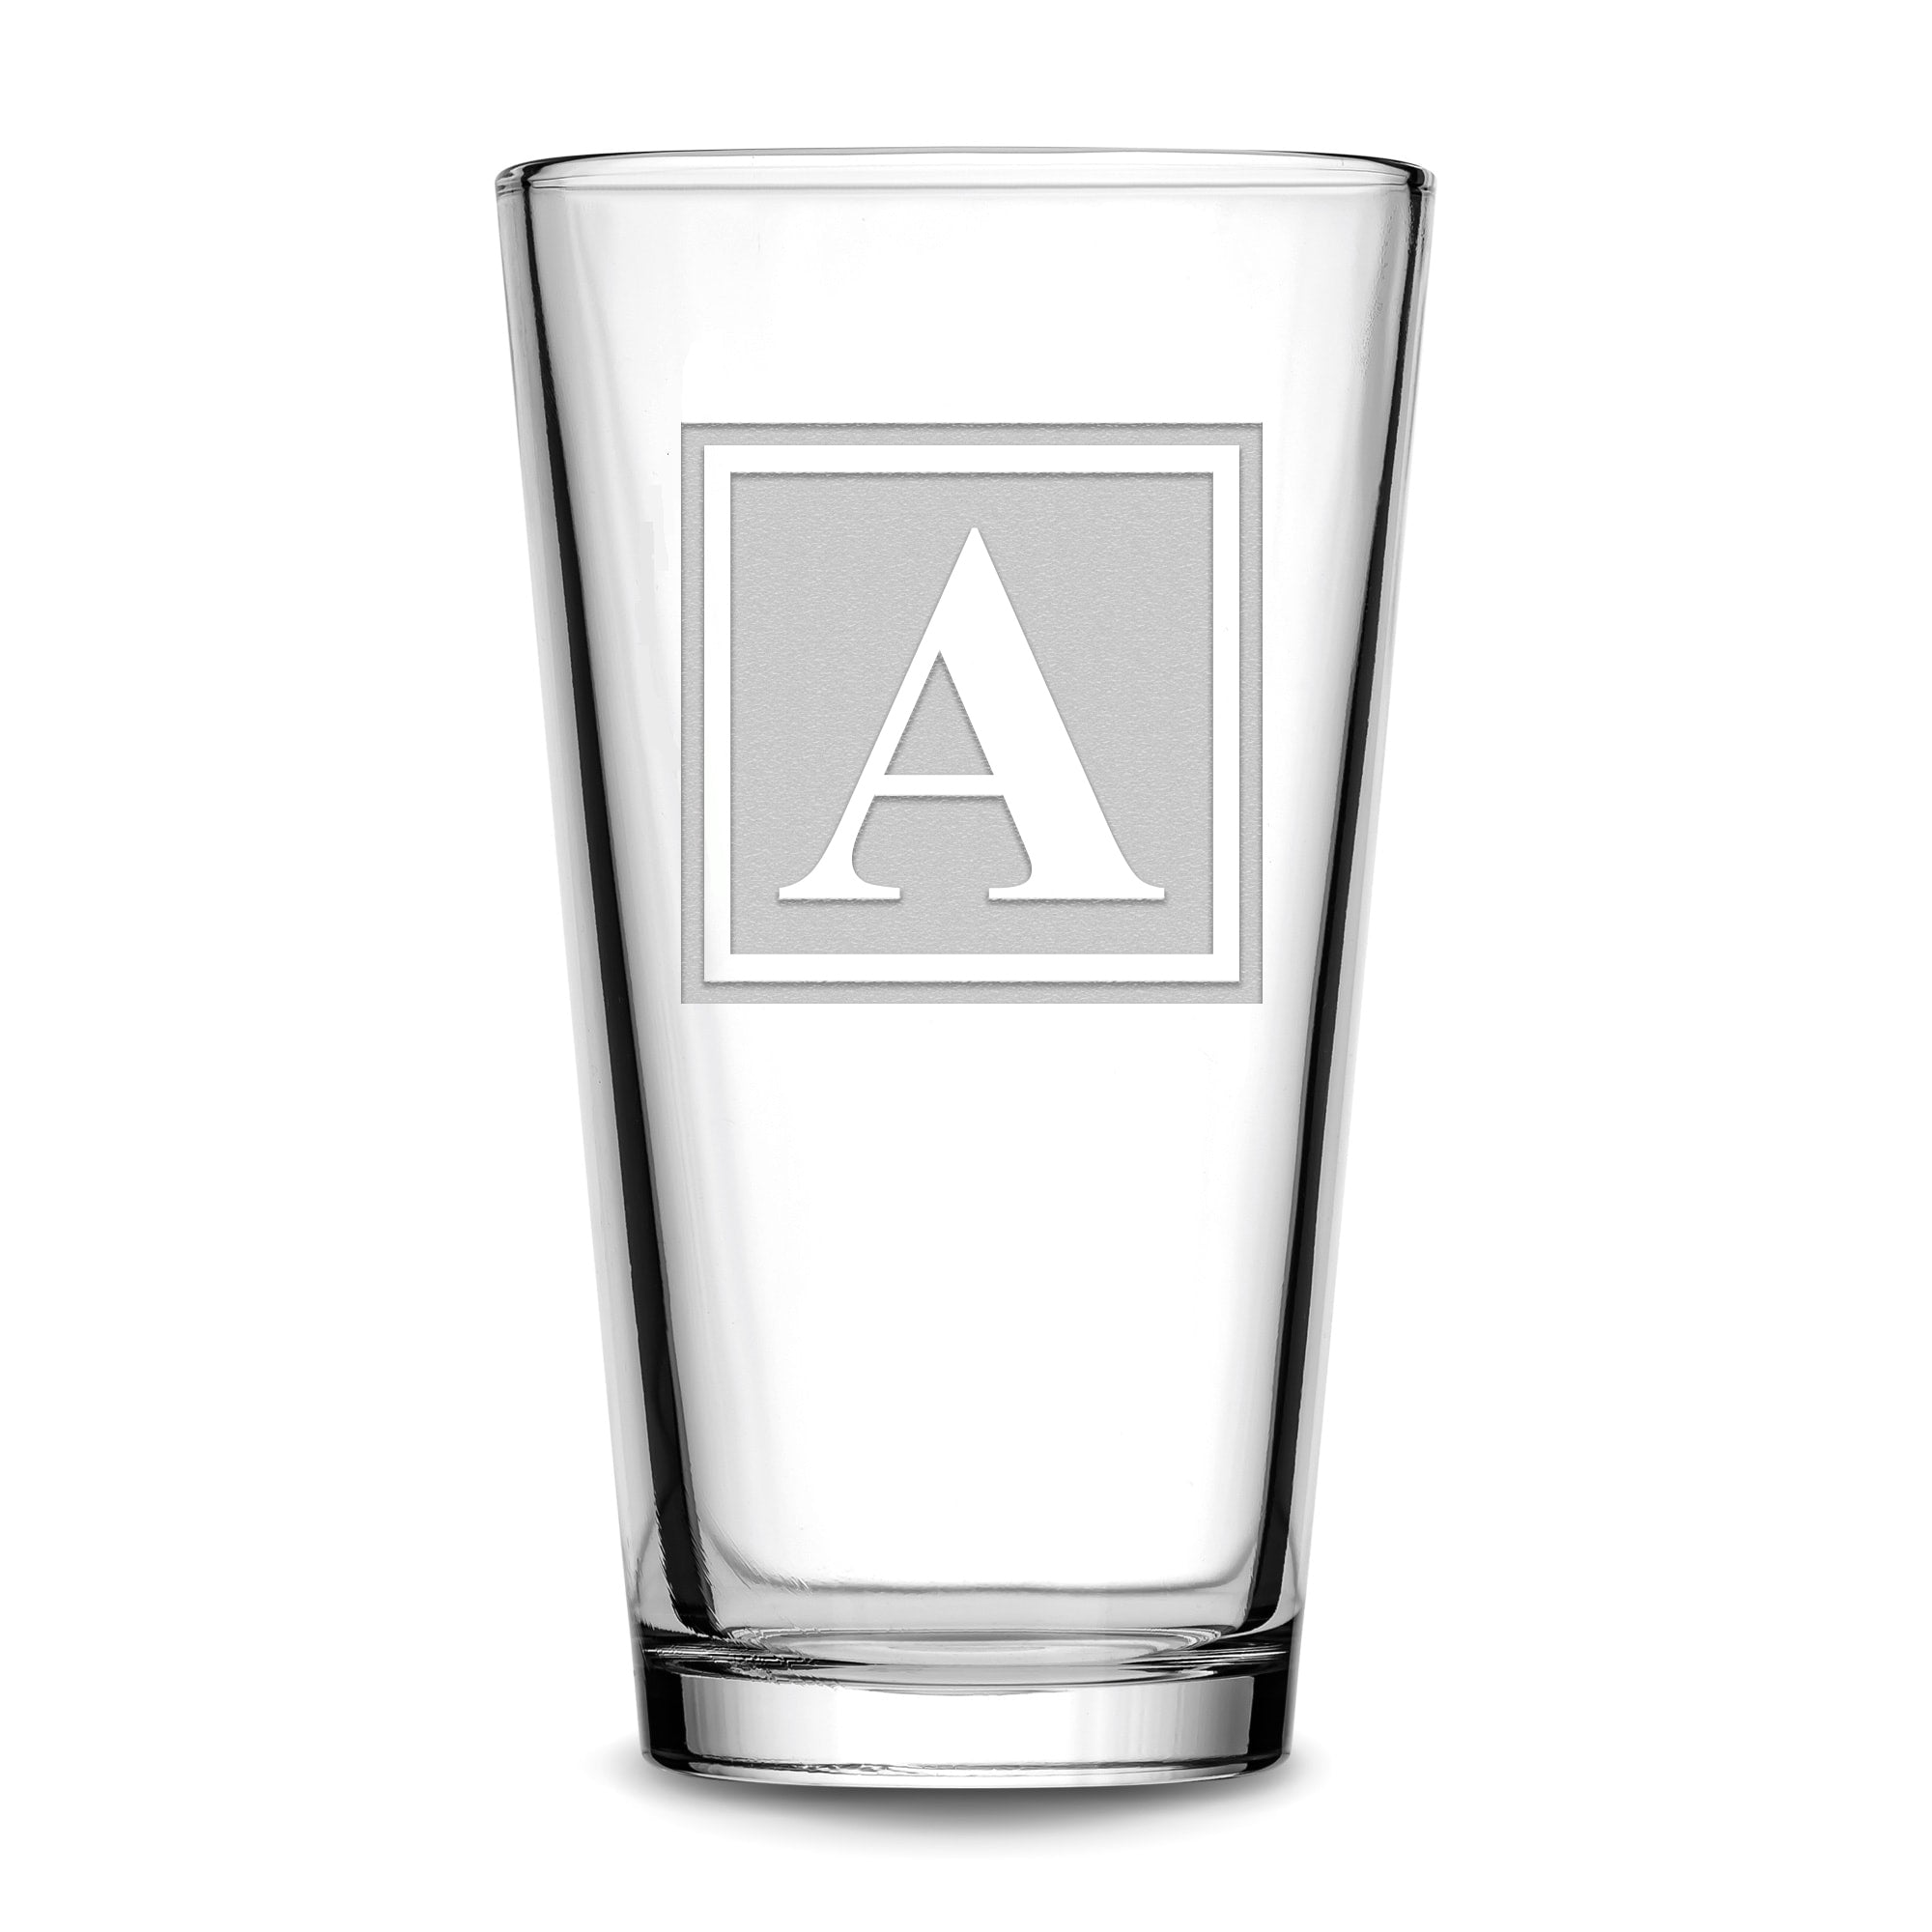 Customizable Monogram Etched Pint Glass, Beer Glass, 16oz, Laser Etched or Hand Etched